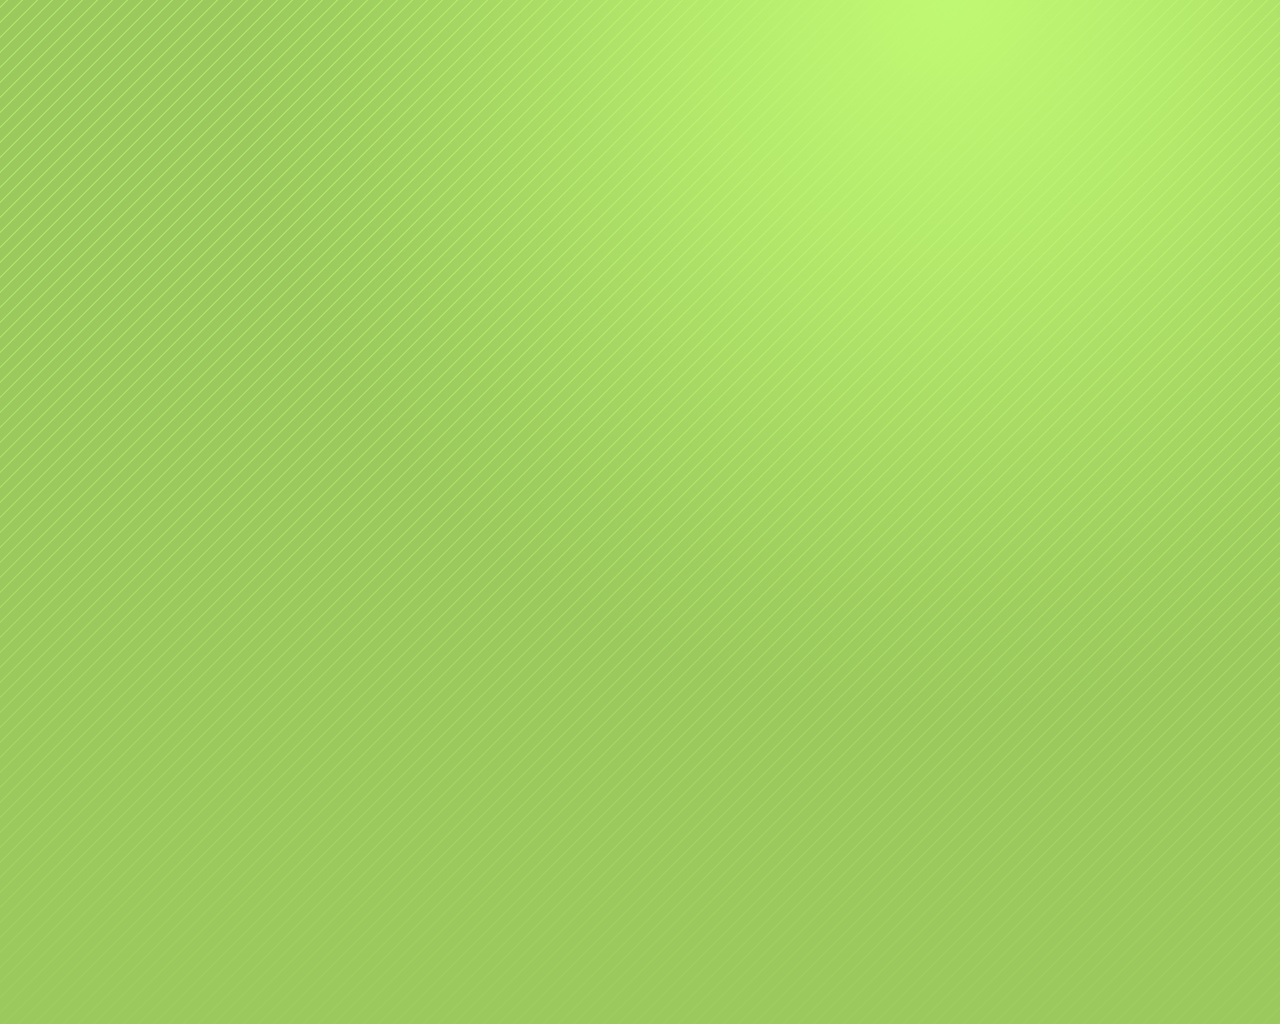 Green Fresh Gradual Background Wallpaper Image For Free Download  Pngtree   Iphone wallpaper green Simple background images Teal framed art